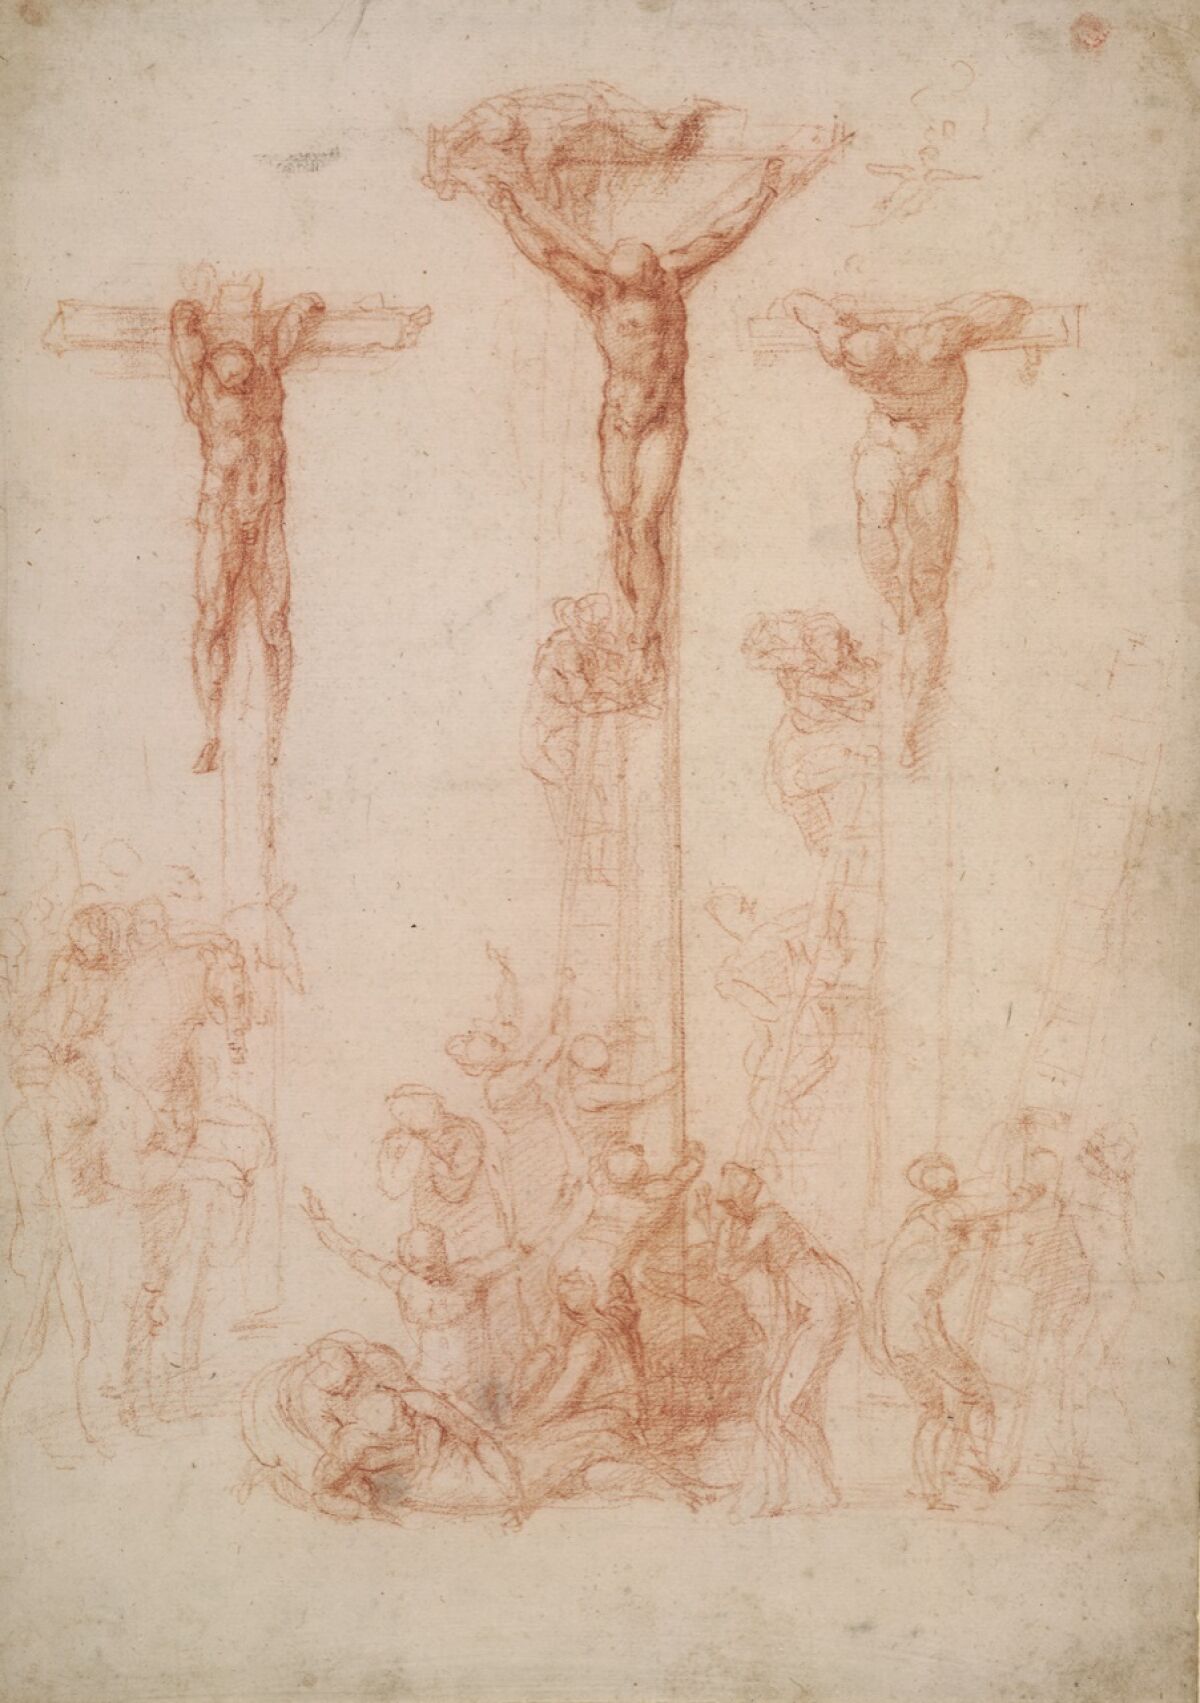 Michelangelo, The Three Crosses, c. 1520, red chalk and wash ©The Trustees of the British Museum